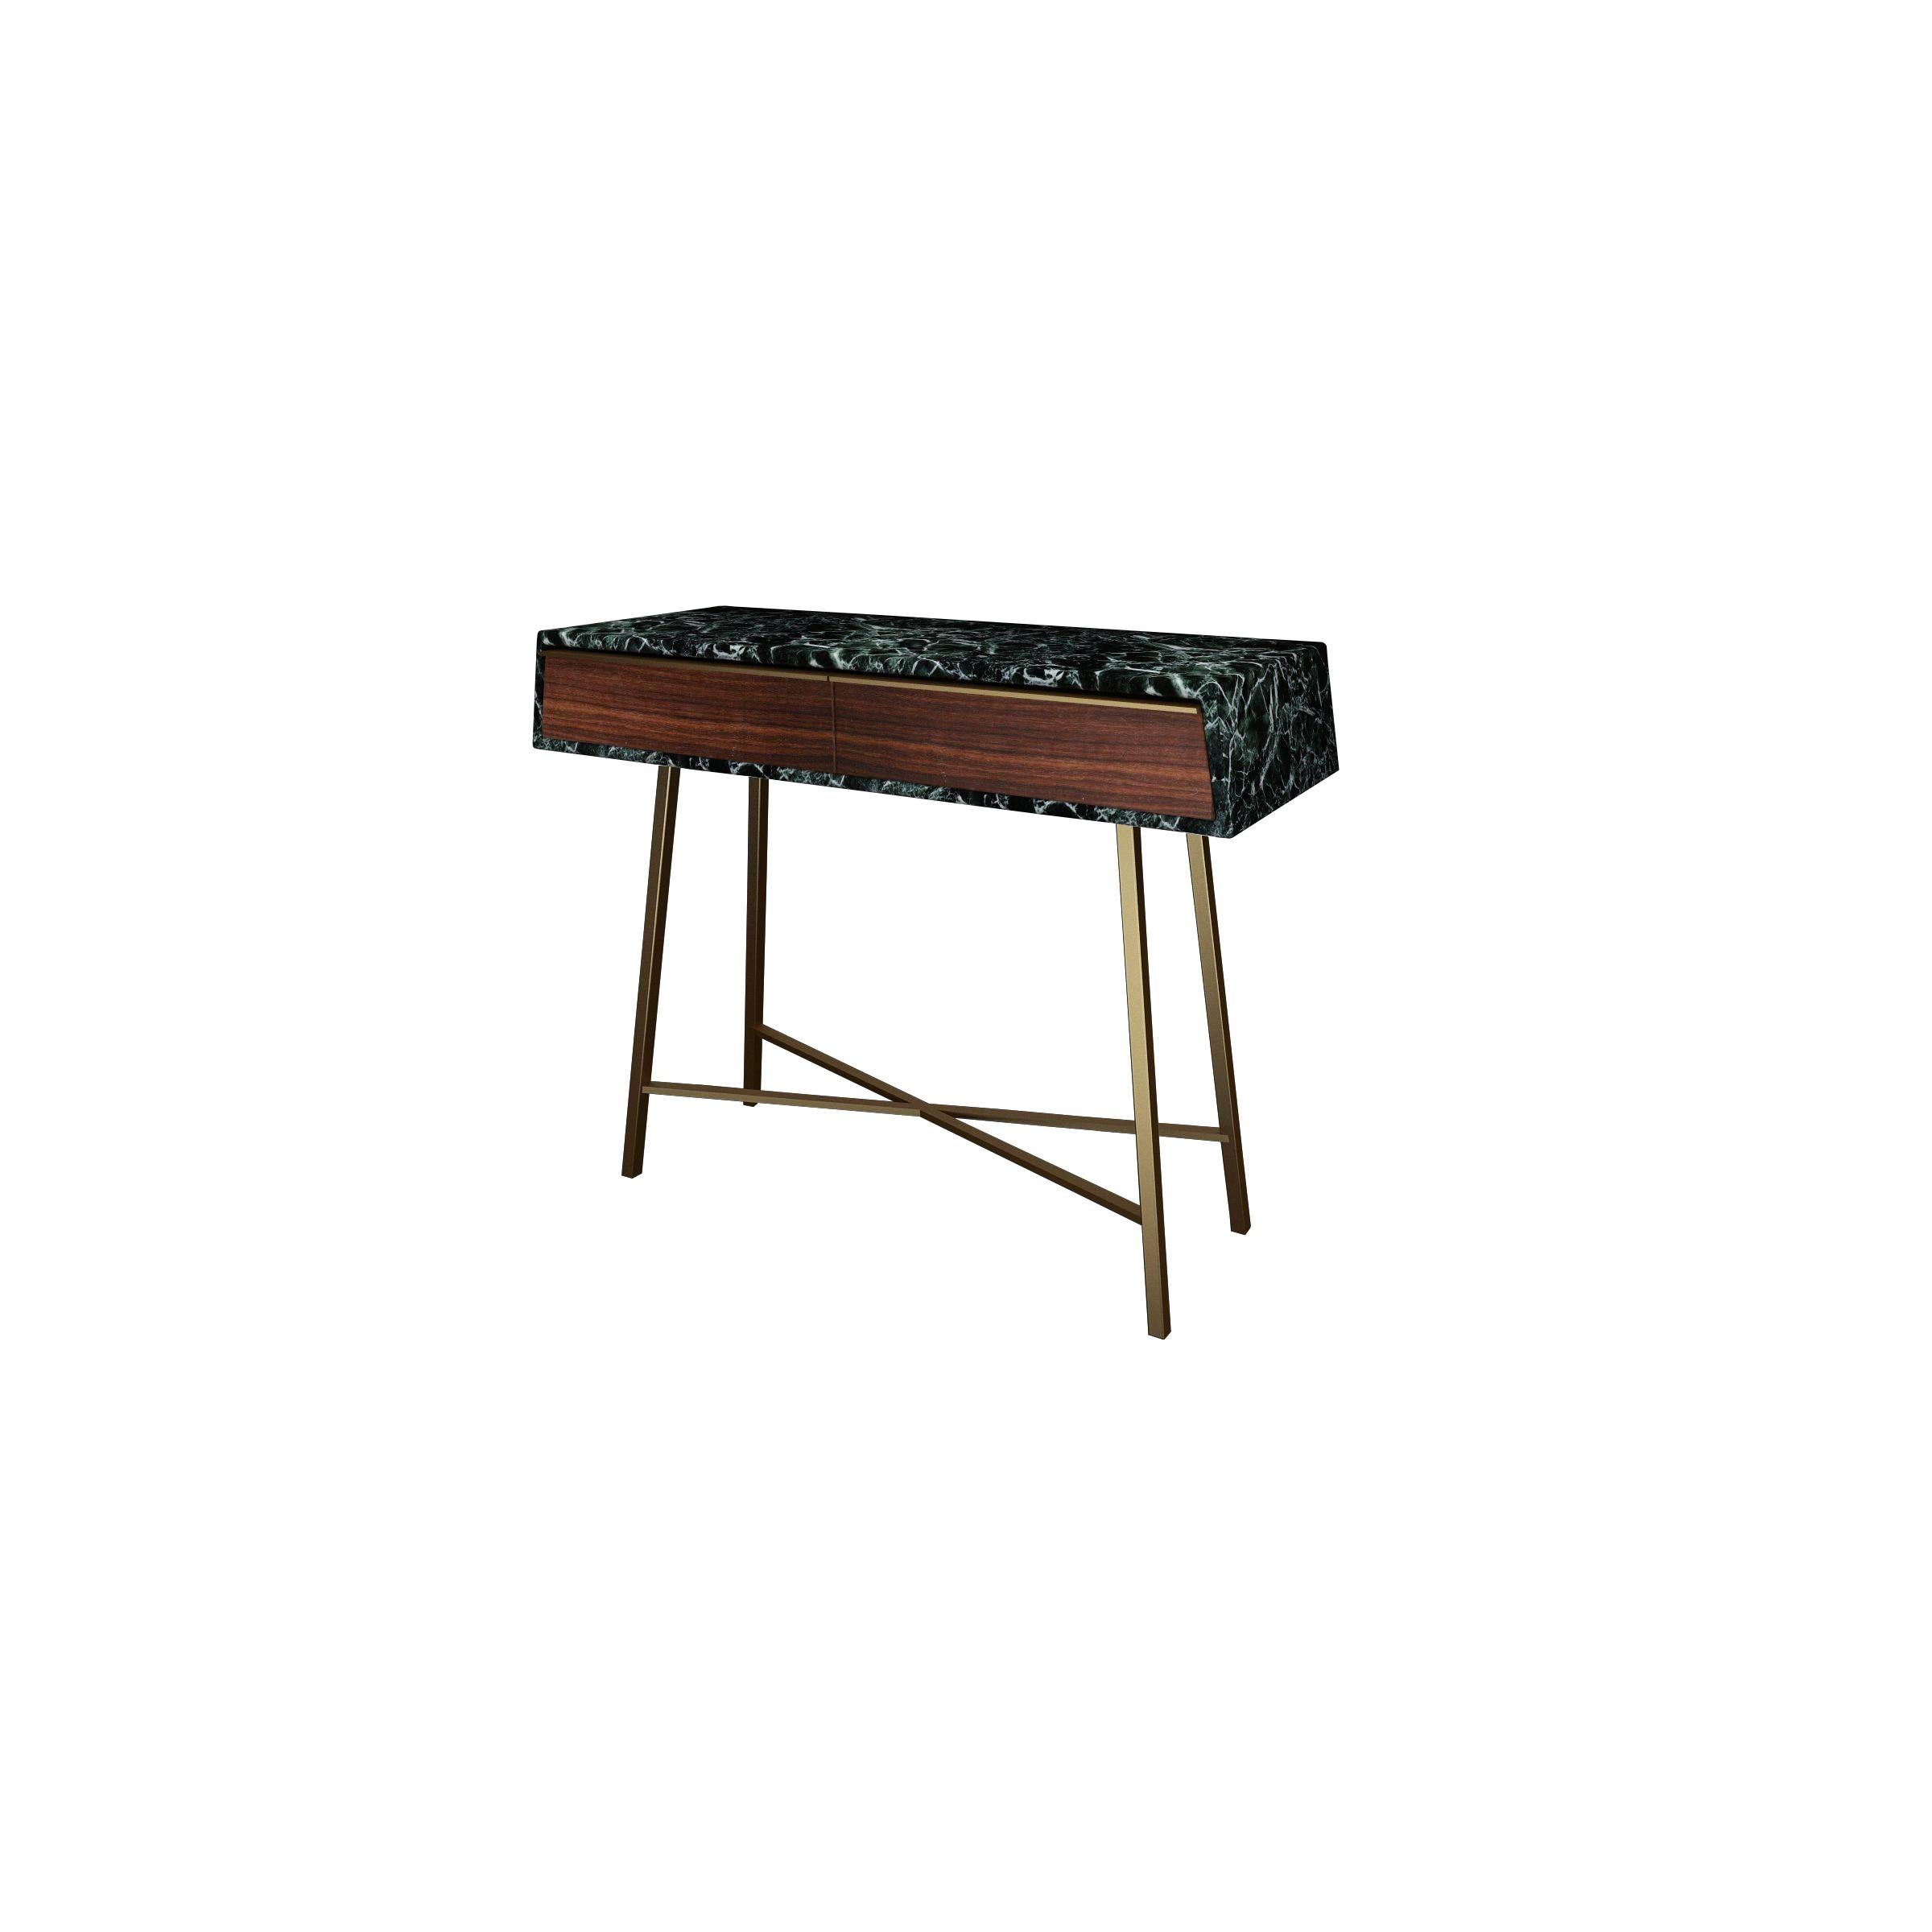 Chinese NORDST JESSICA Console 2 Drawers Table, Black Eagle Marble, Danish Modern Design For Sale